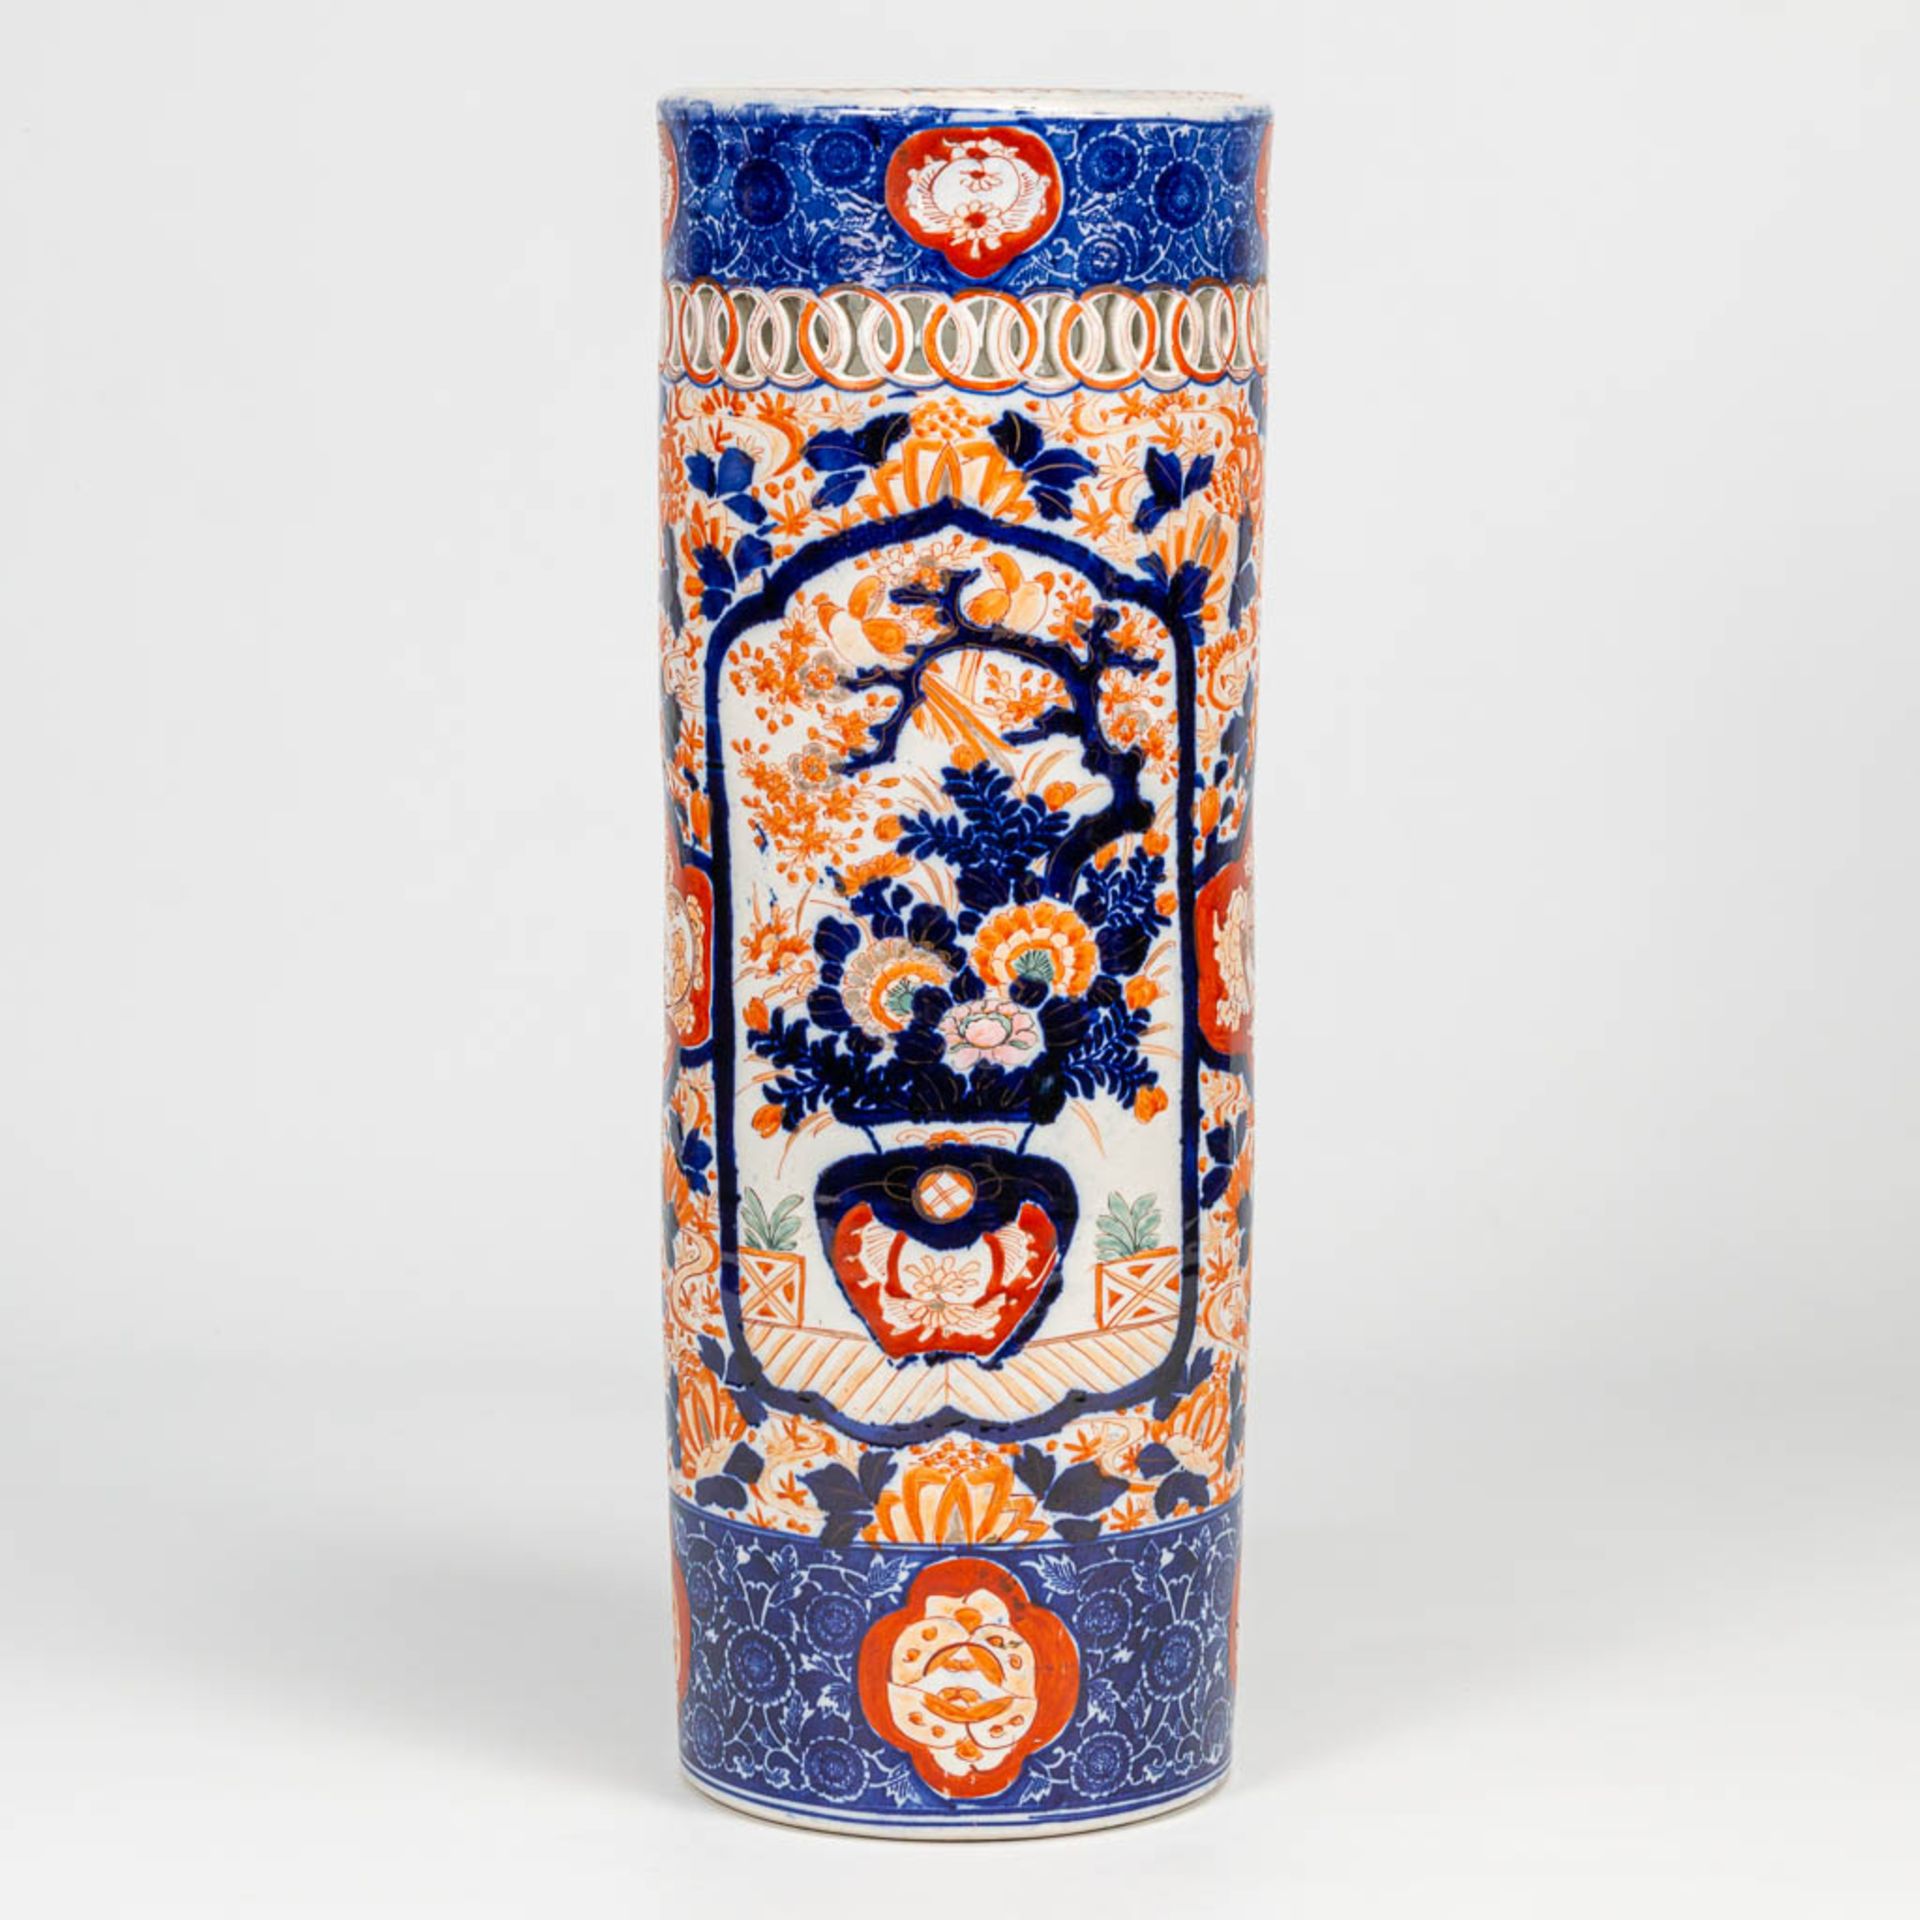 An Imari umbrella stand, vase made of porcelain in Japan. 19th/20th century. (61 x 22 cm) - Image 8 of 17